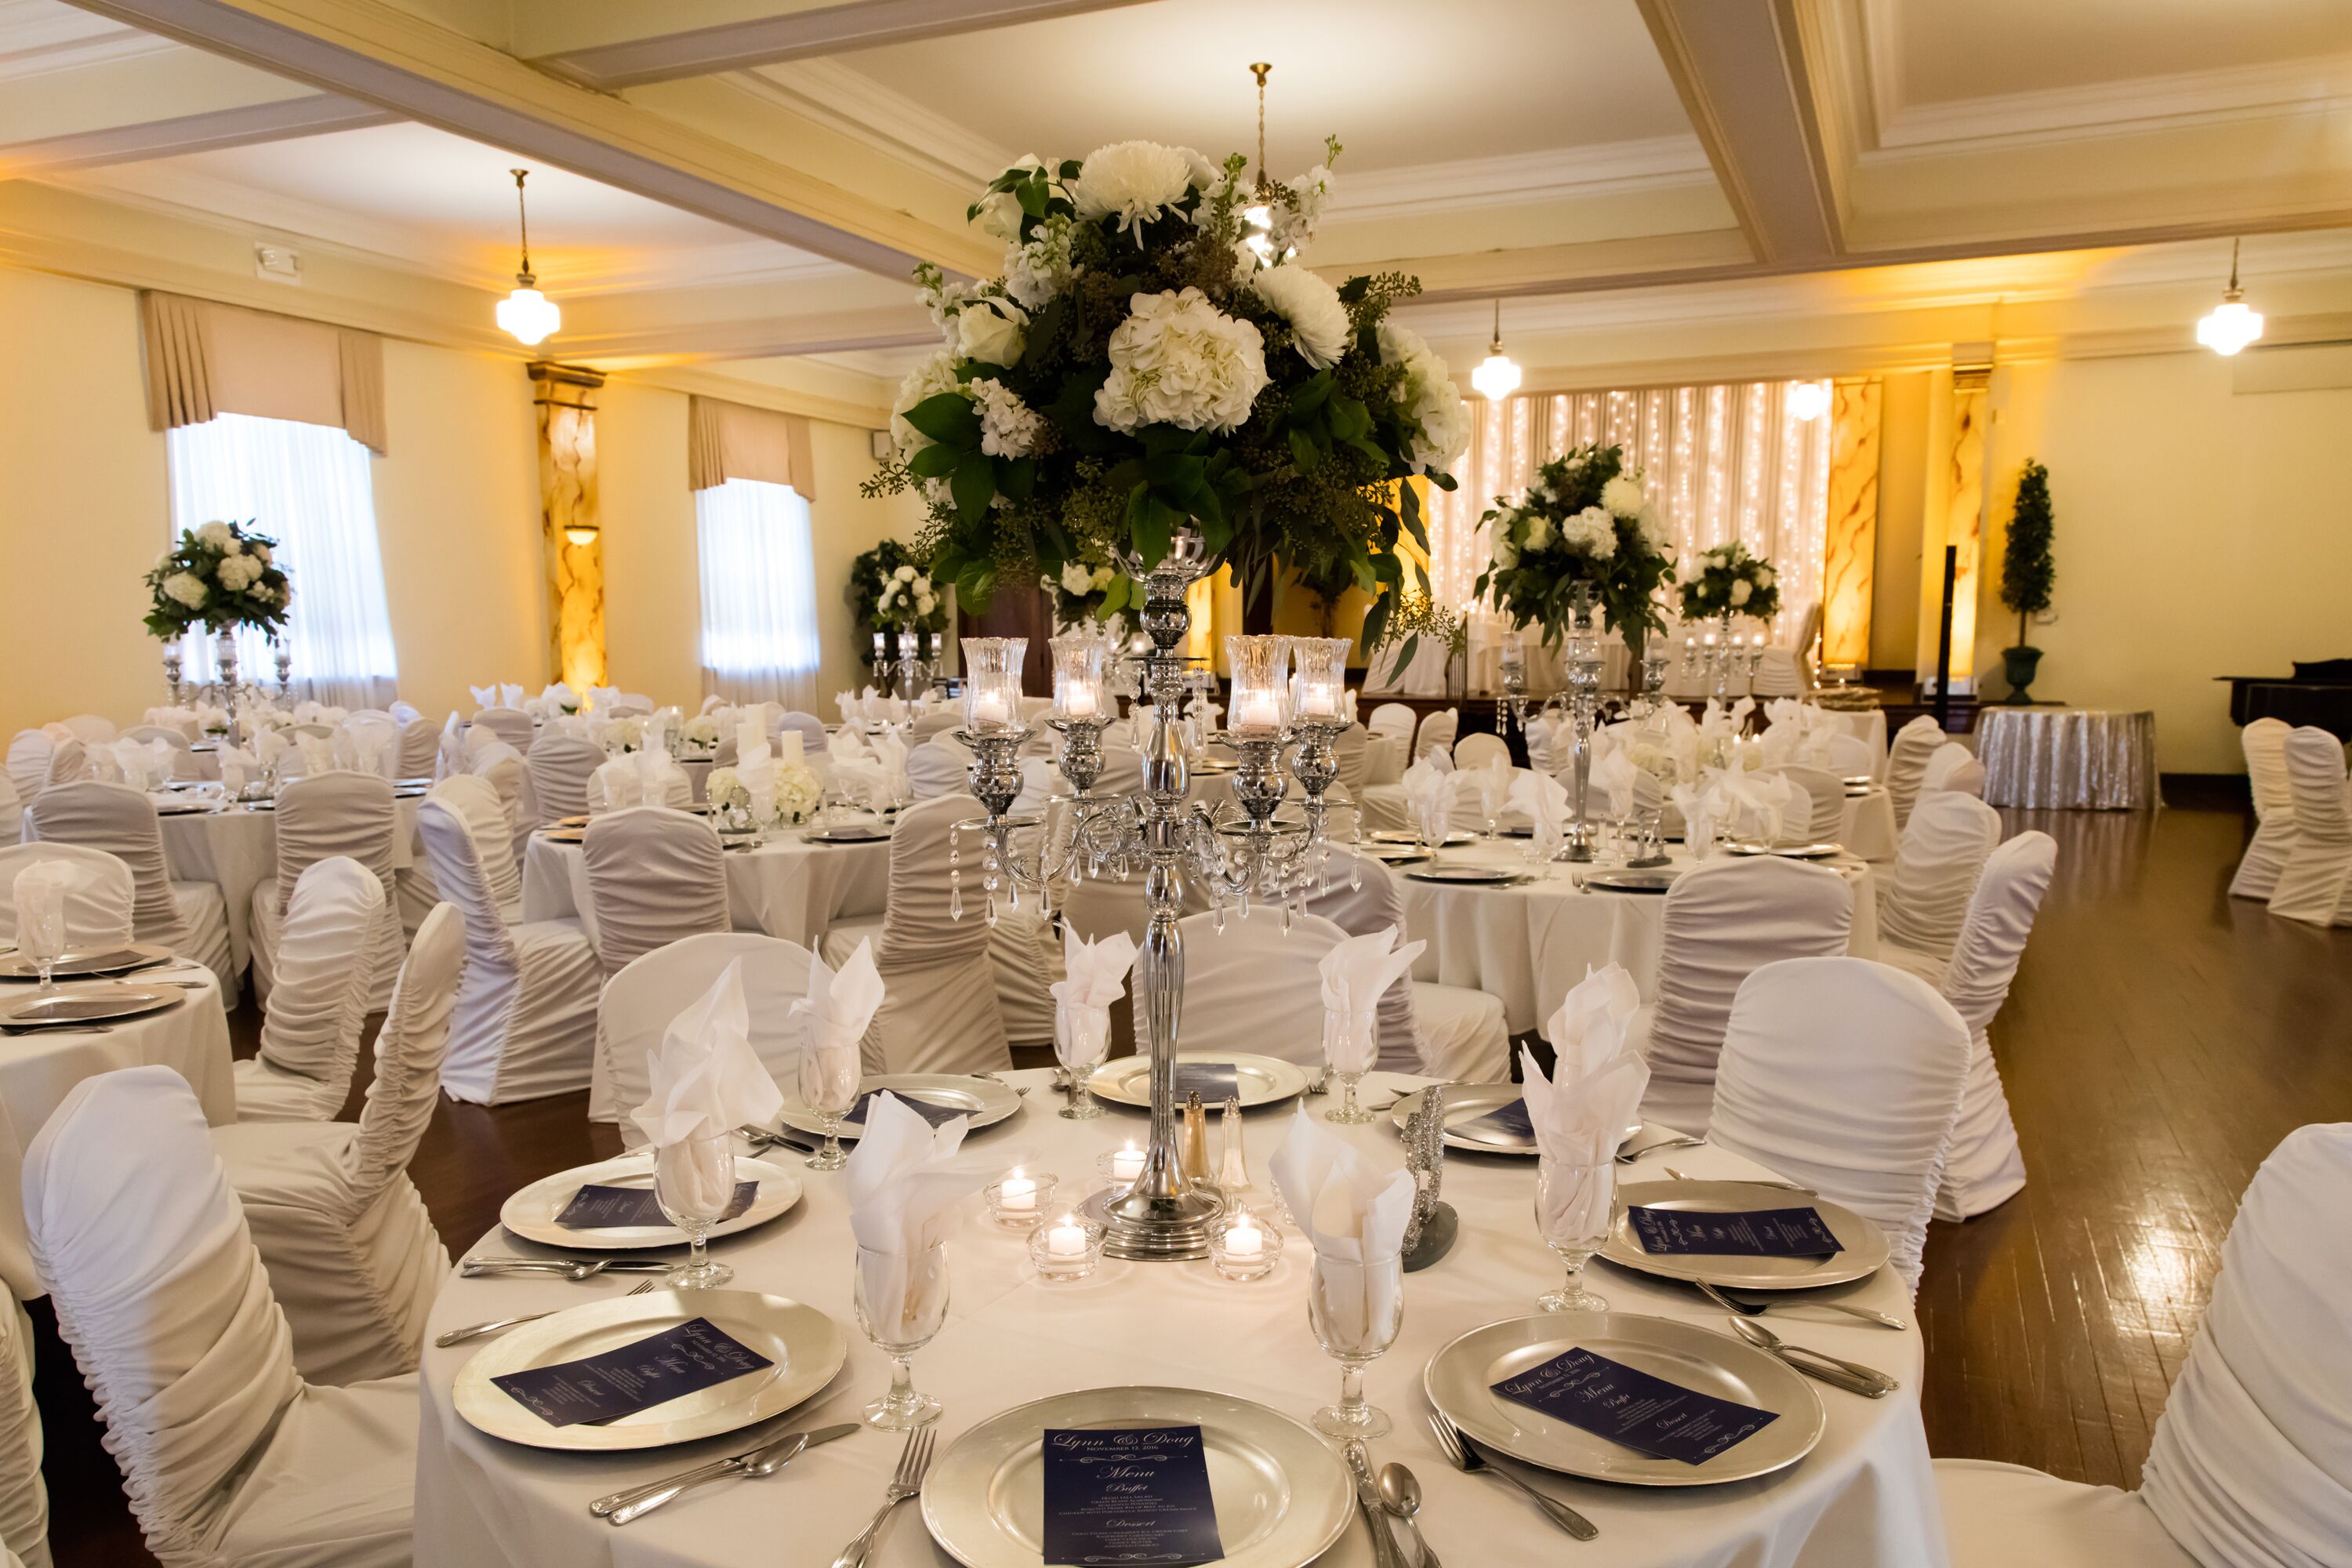 Amazing Belleville Il Wedding Venues in the year 2023 Don t miss out 